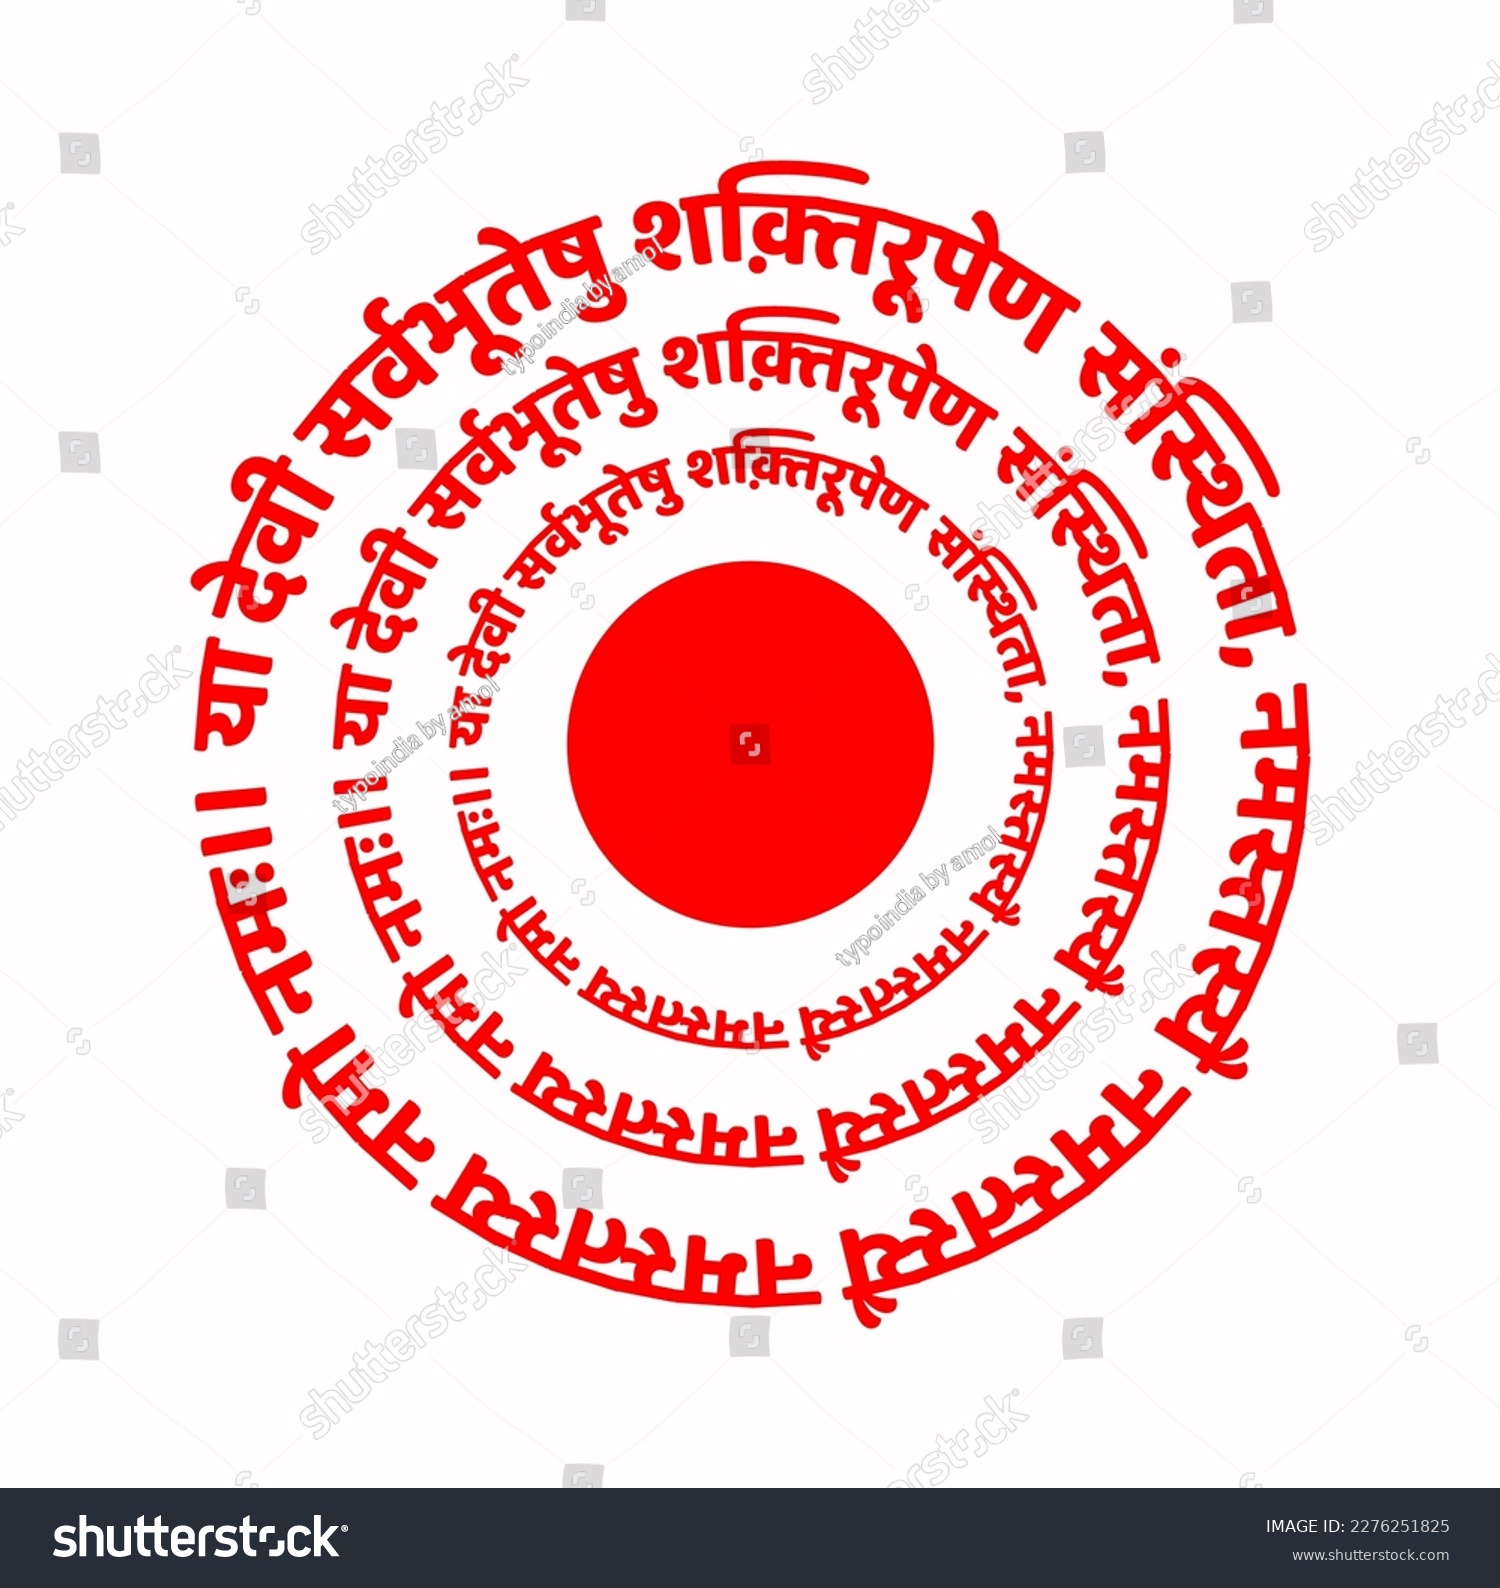 SVG of Lord Dunga mantra in Sanskrit text. To that Devi Who in All Beings is Called Vishnumaya, Salutations to Her, Salutations to Her, Salutations to Her, Salutations again and again. svg